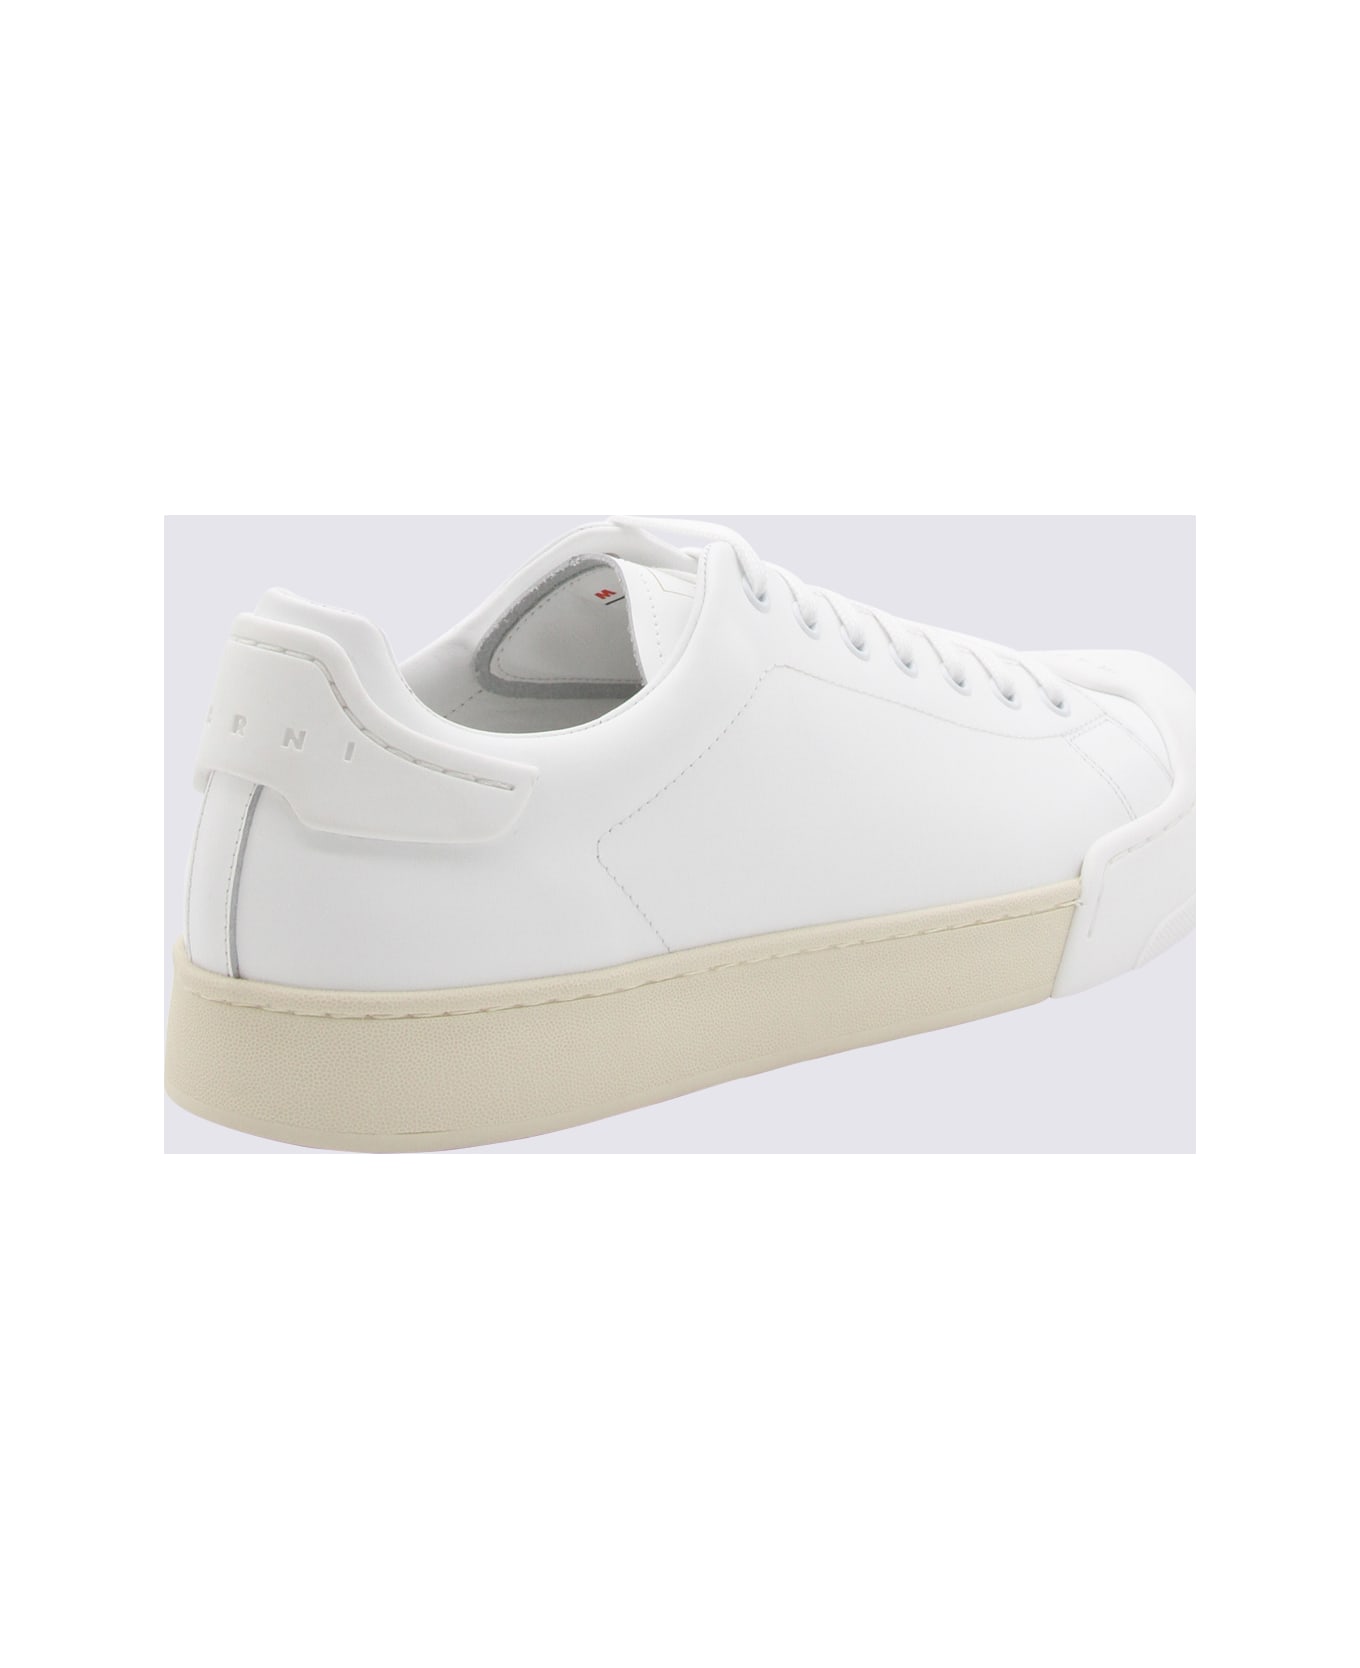 Marni White Leather Sneakers - LILY WHITE/LILY WHITE